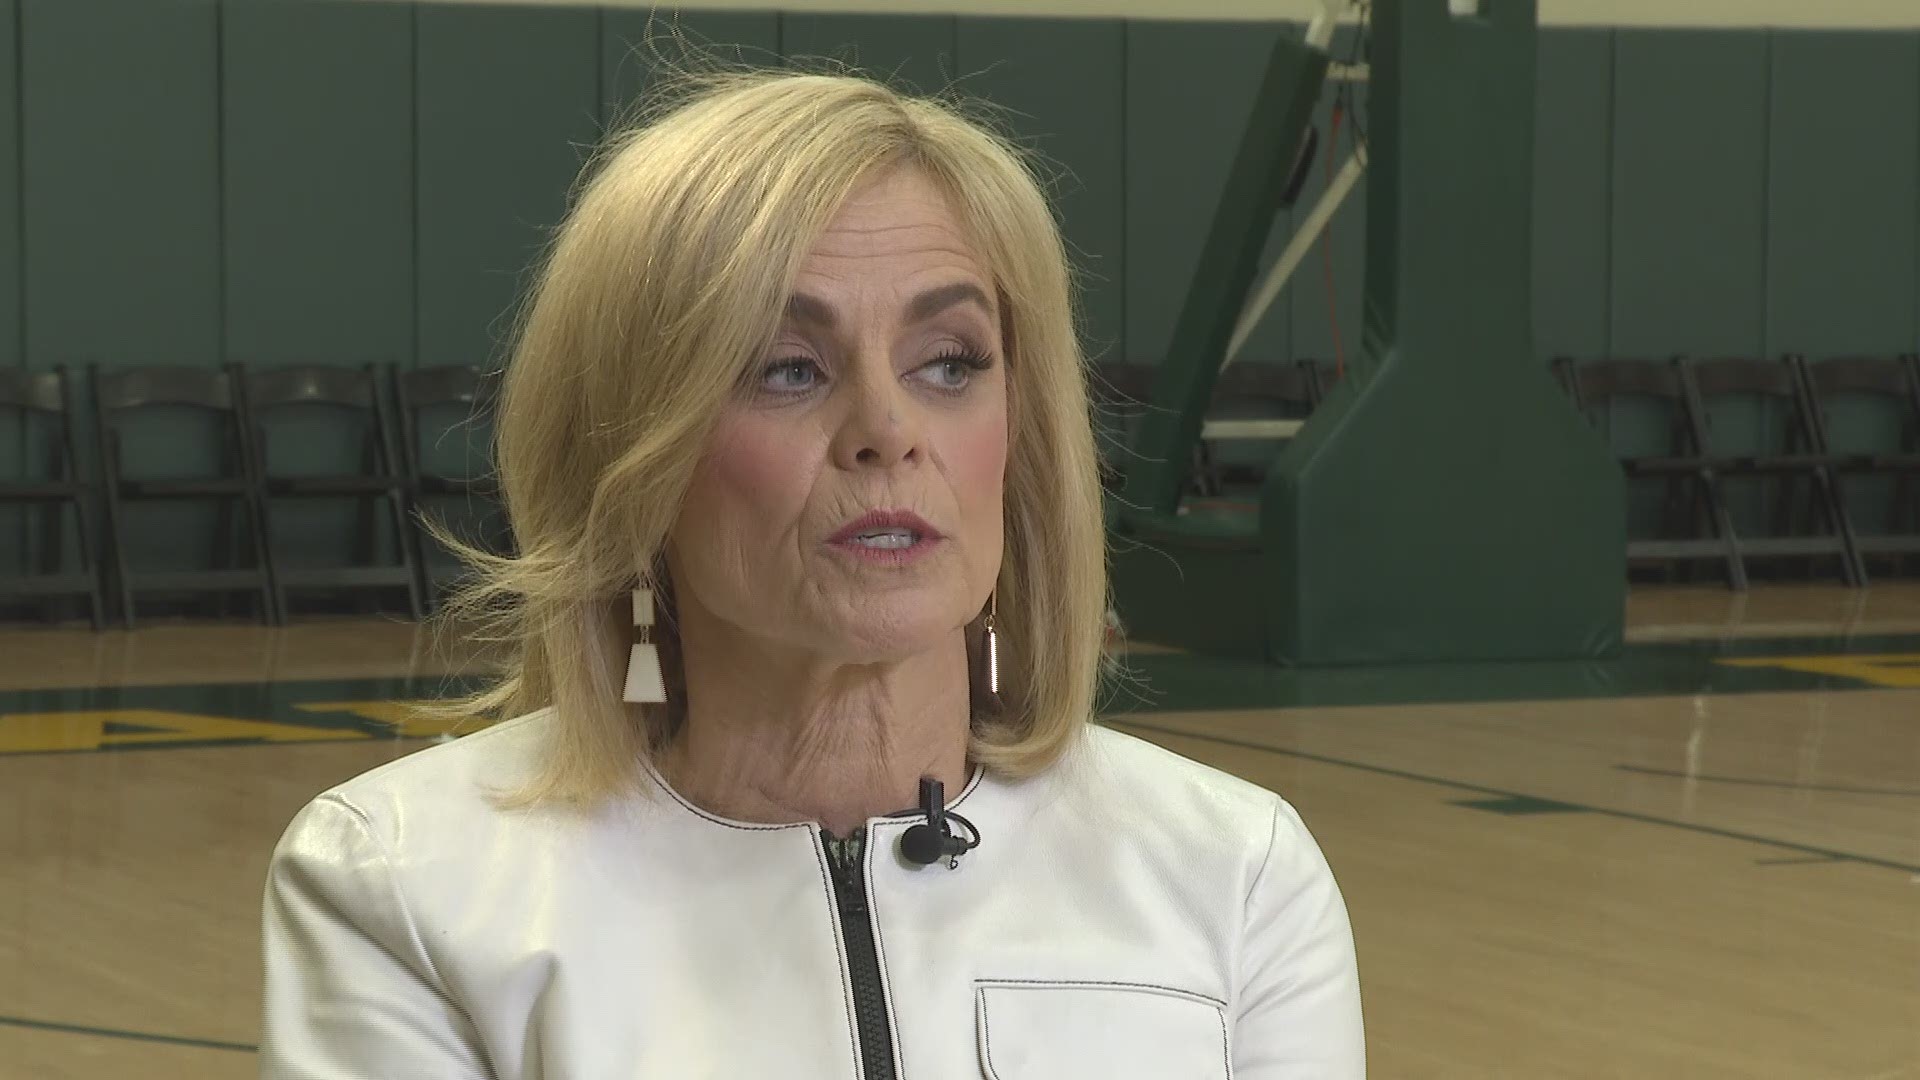 Lady Bears head coach Kim Mulkey said she scheduled her practices at specific times, so she won't miss her kids' games.